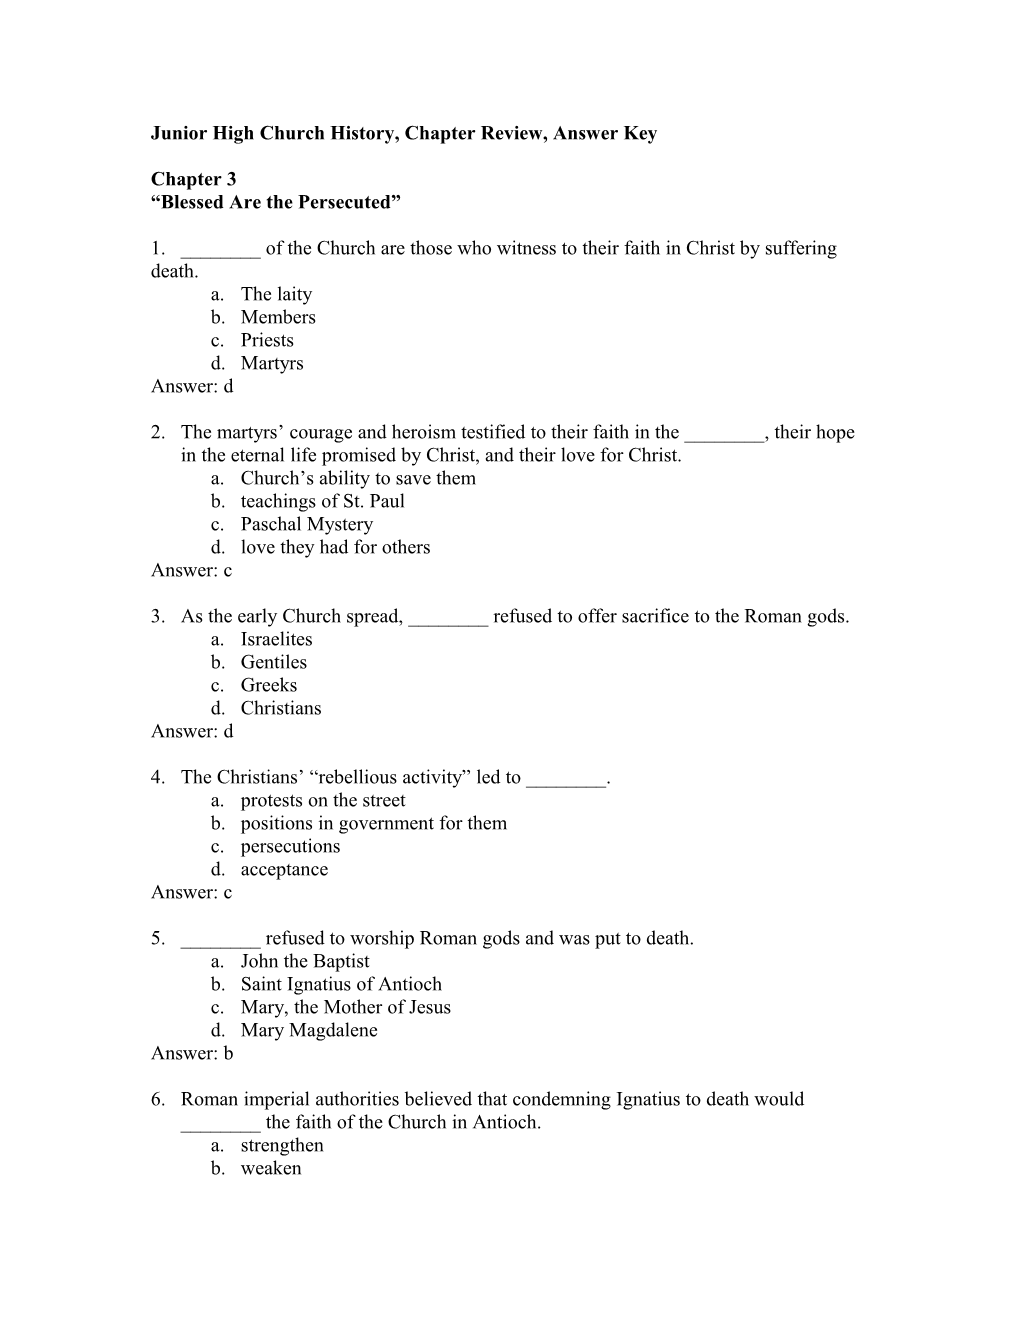 Junior High Church History, Chapter Review, Answer Key s1